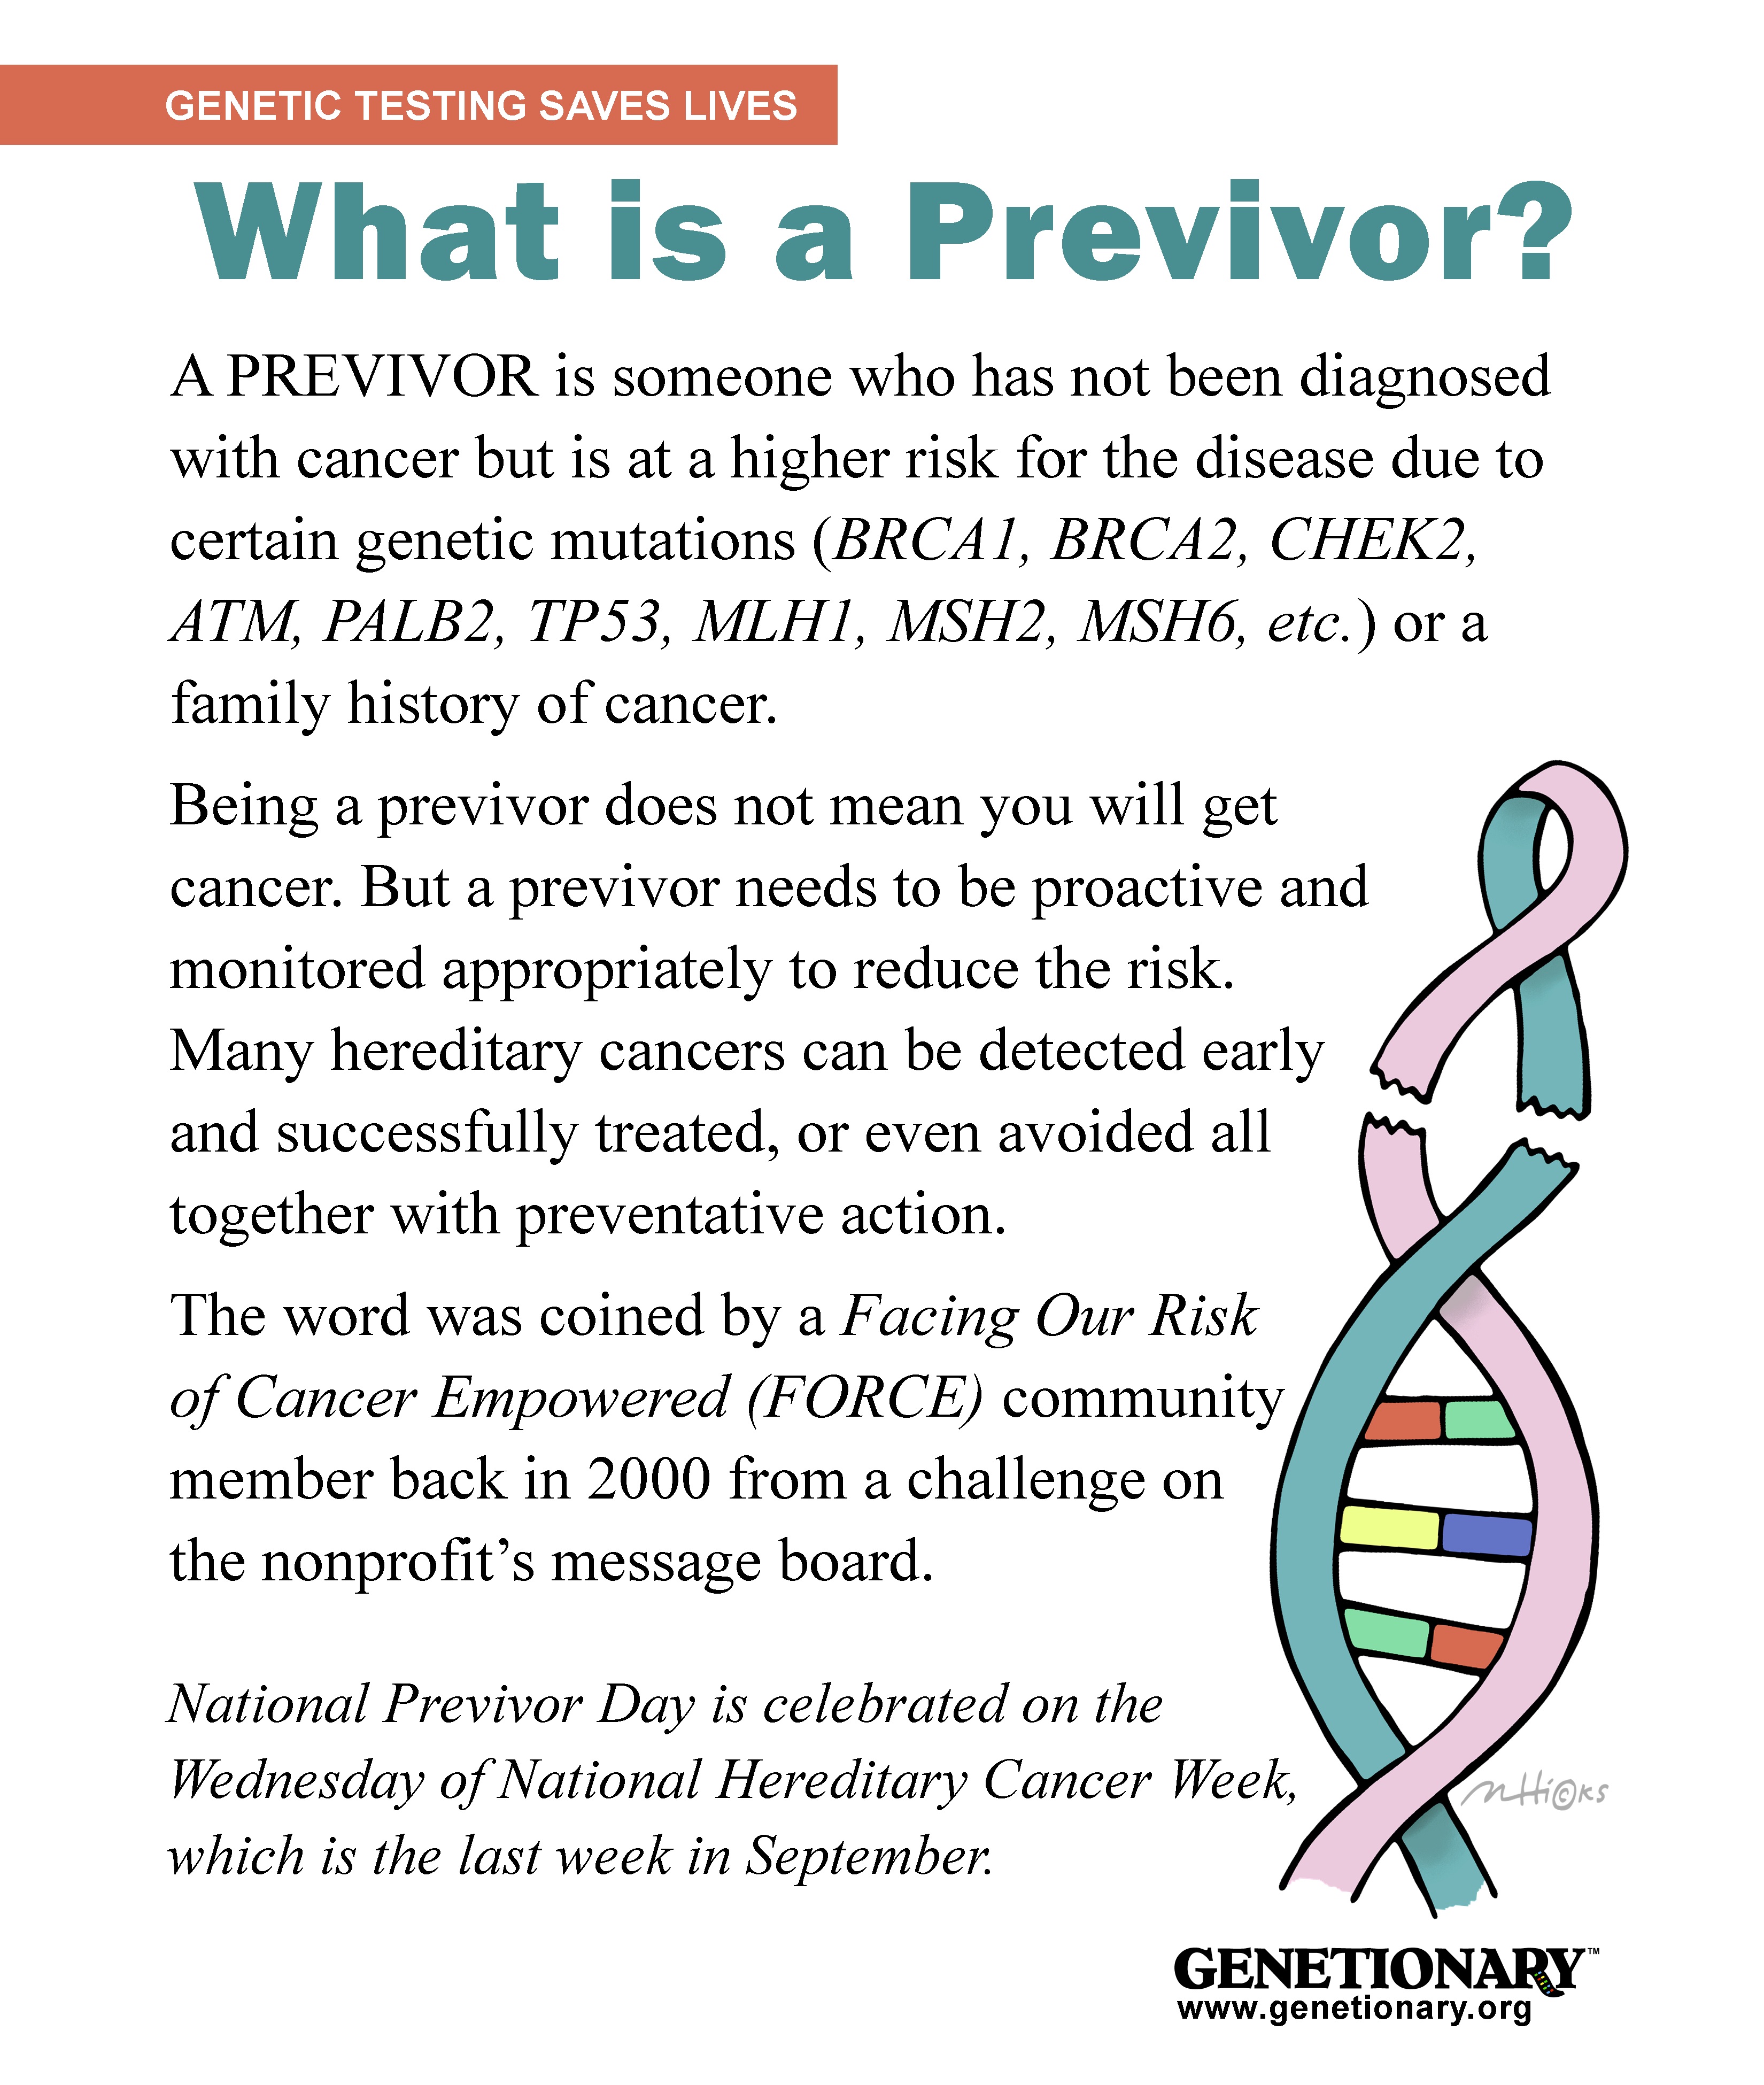 What is a Previvor?